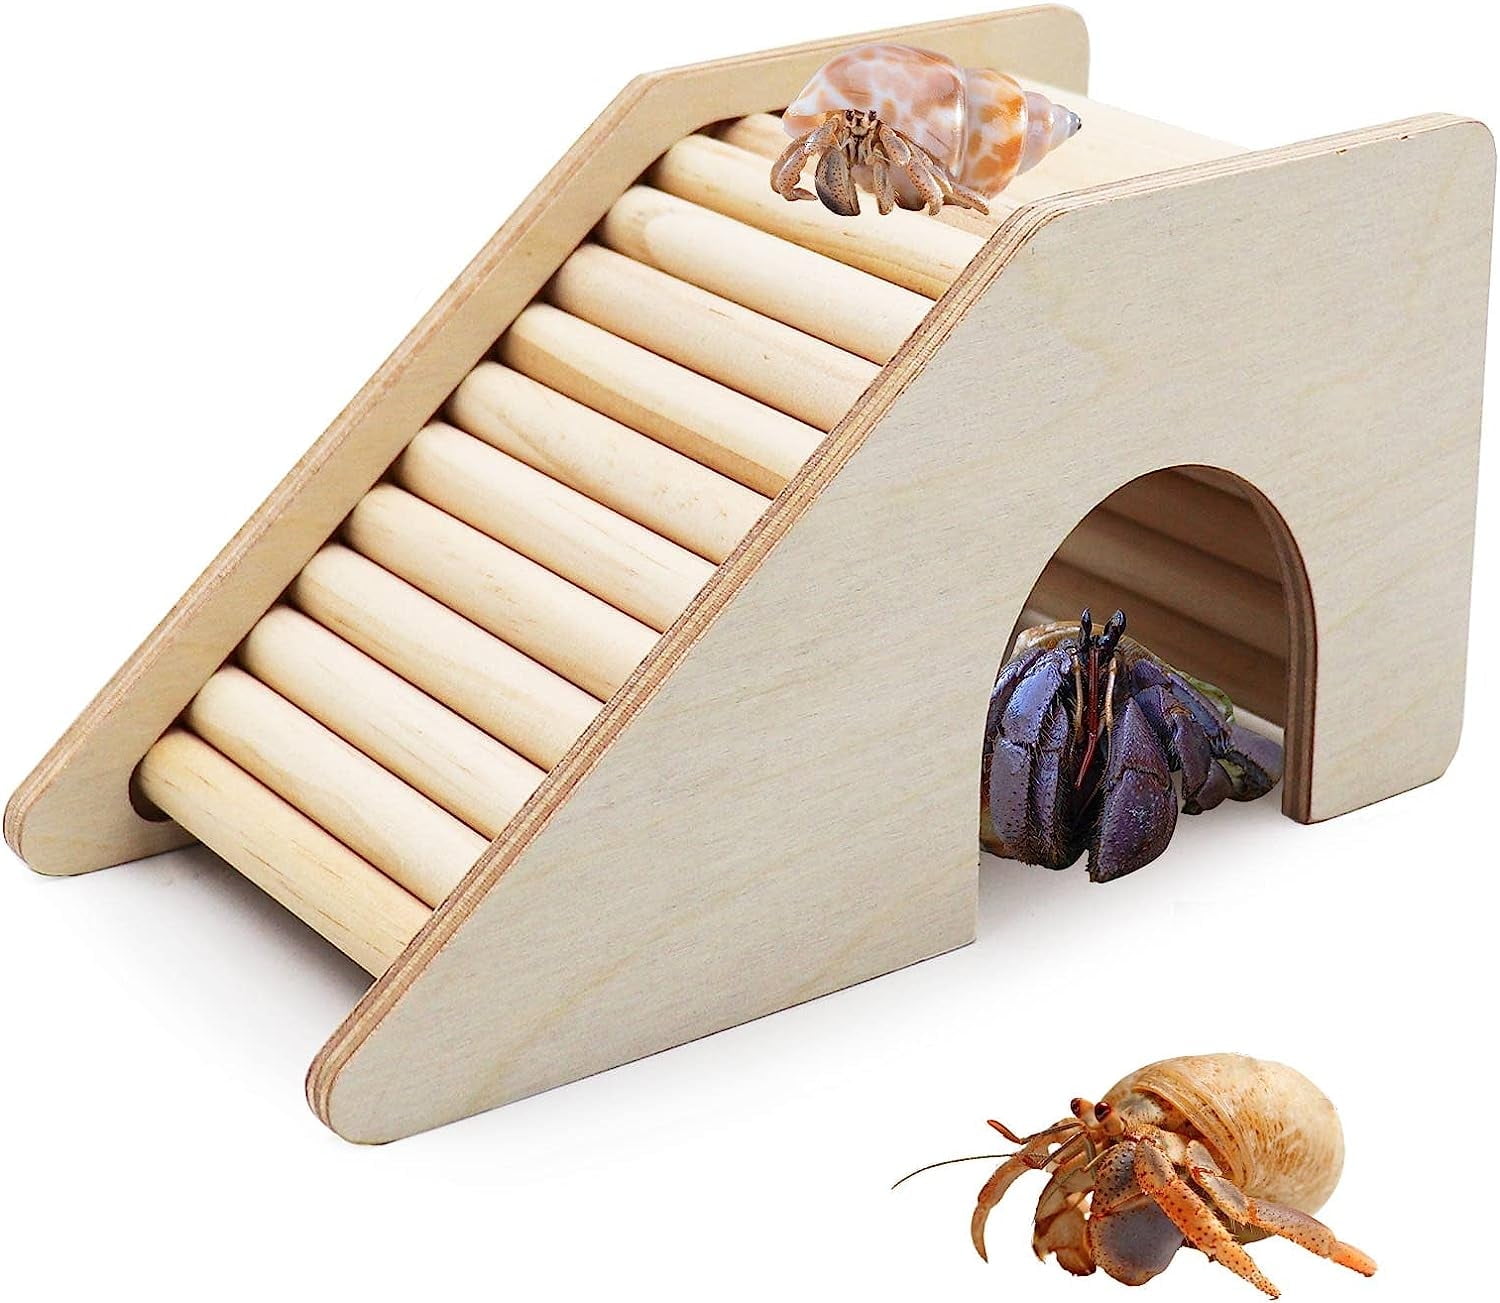 Hermit Crab Hideout with Ramp, Wooden Hermit Crab Climibing Toys